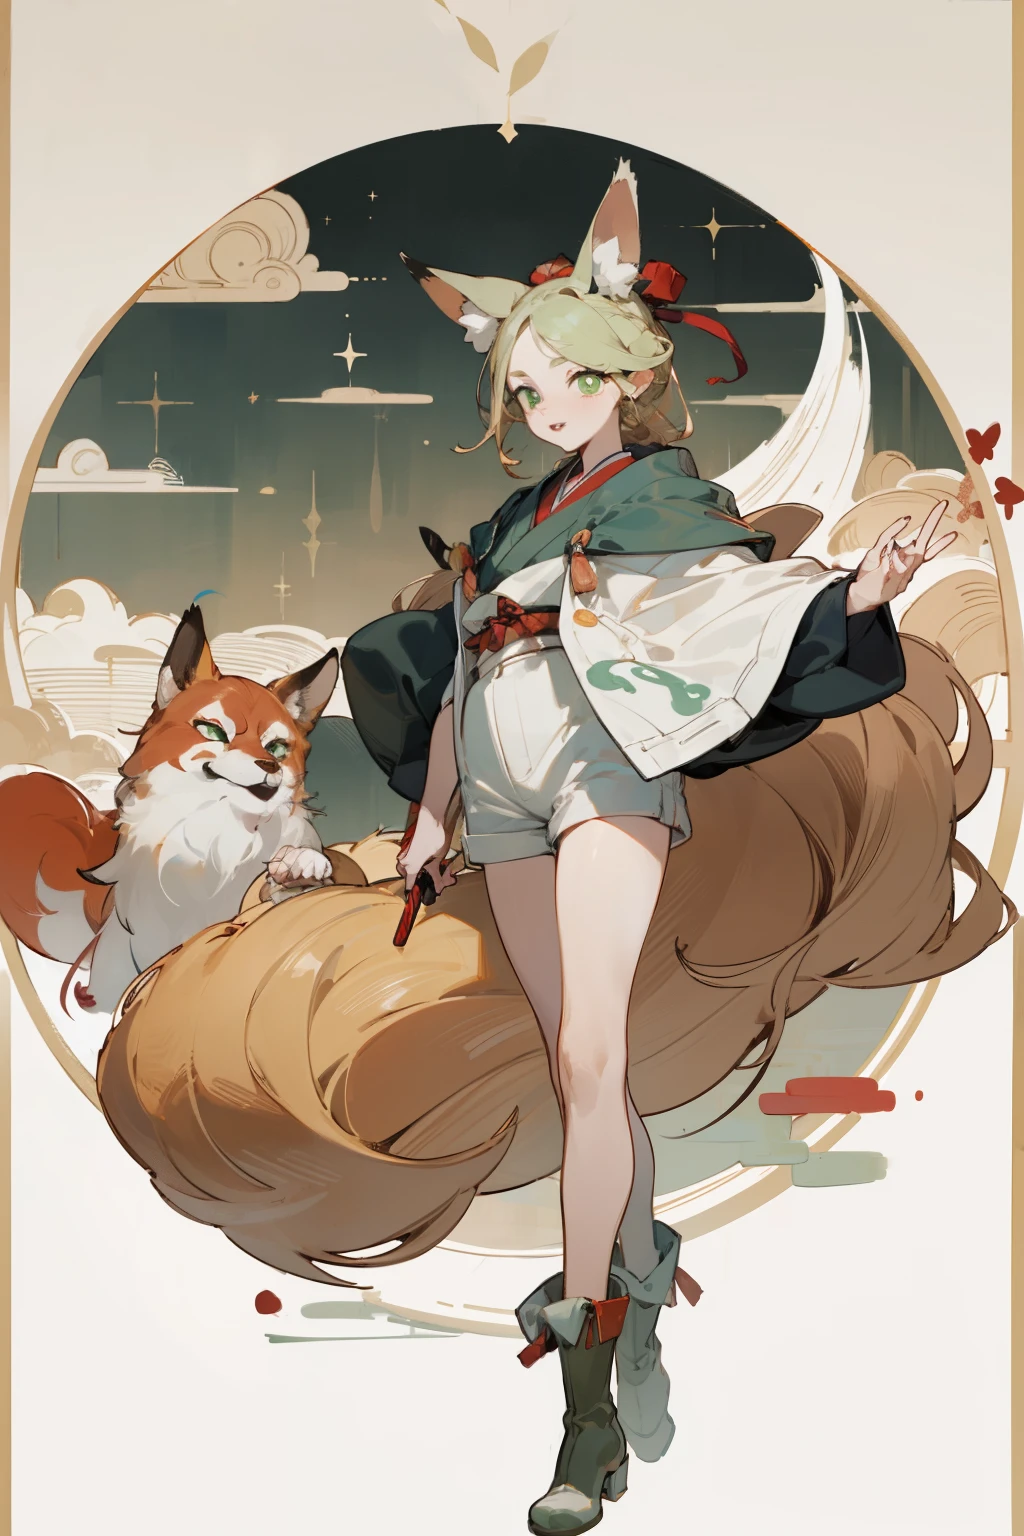 Upper body standing painting, Vision, panoramic, Honey, Solitary, Fair skin, (Fox ears), Exquisite eyes, Facial details, Green Eyes, Red Eyeshadow, lips are red，white shorts, careful, Fake laugh, Ukiyo-e, masterpiece, high quality, at the lowest limit, Tiny,White boots